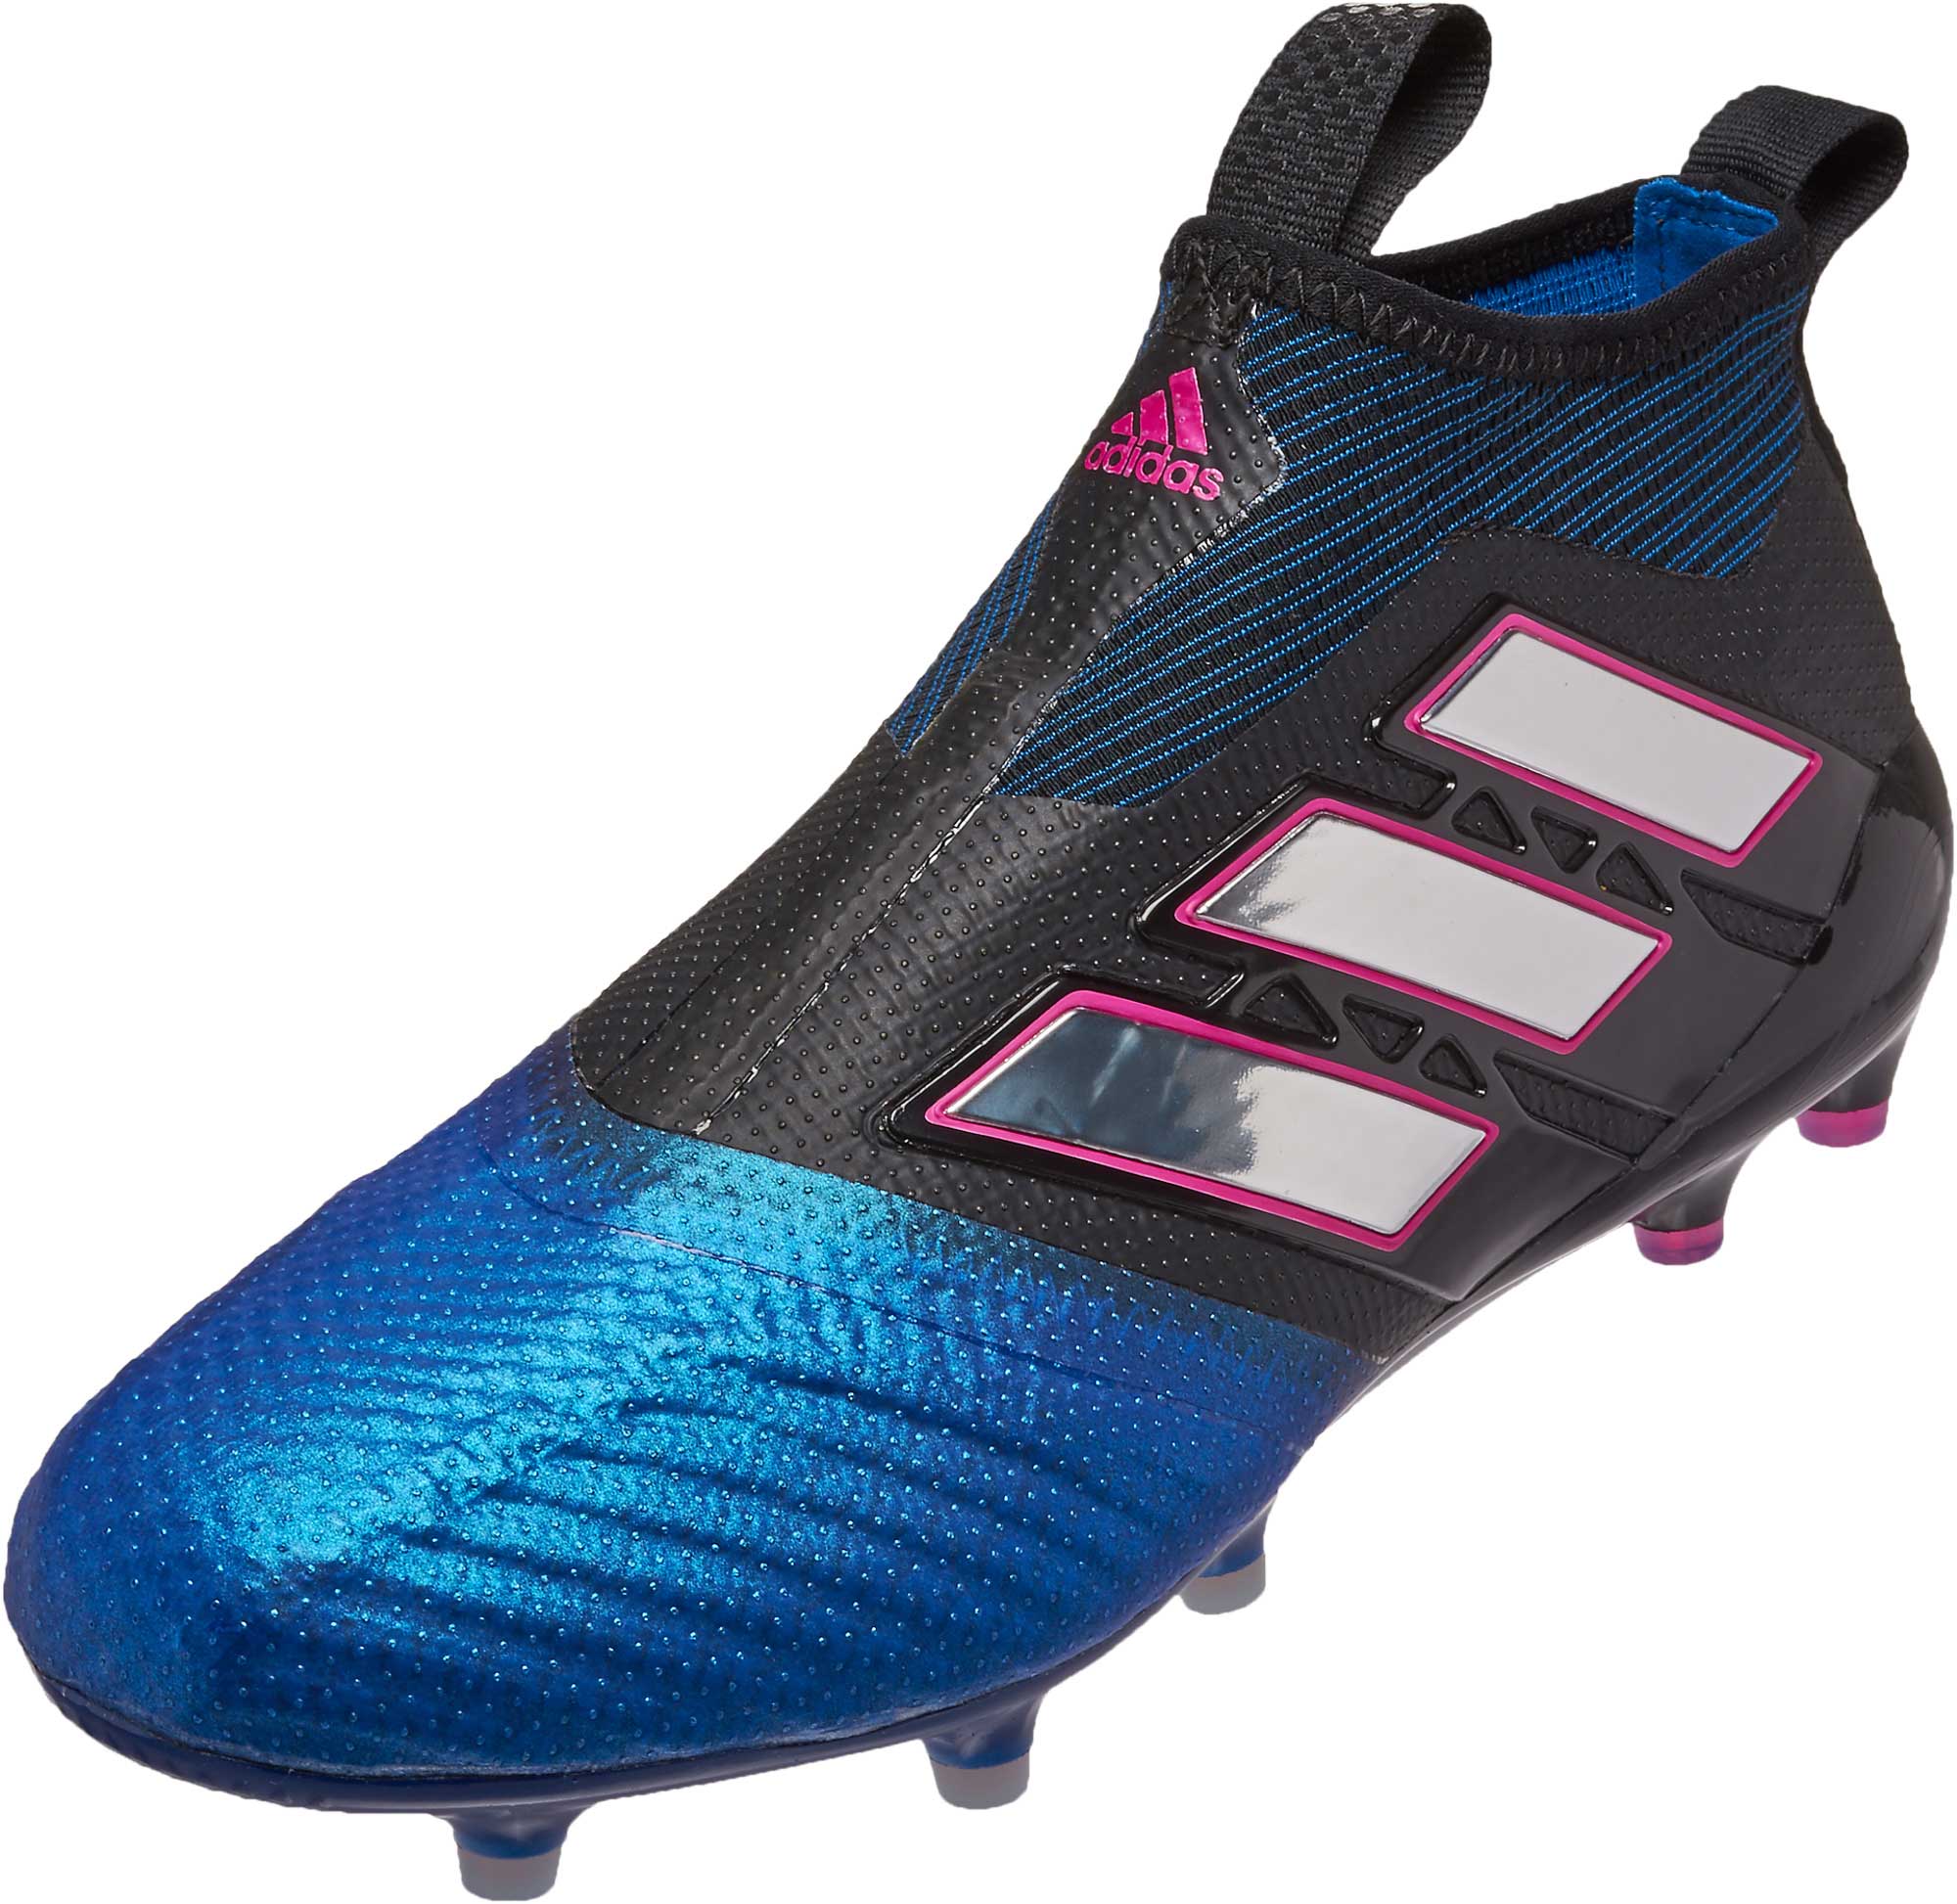 Woning Zinloos Meander adidas ACE 17 Purecontrol FG - adidas ACE Soccer Cleats